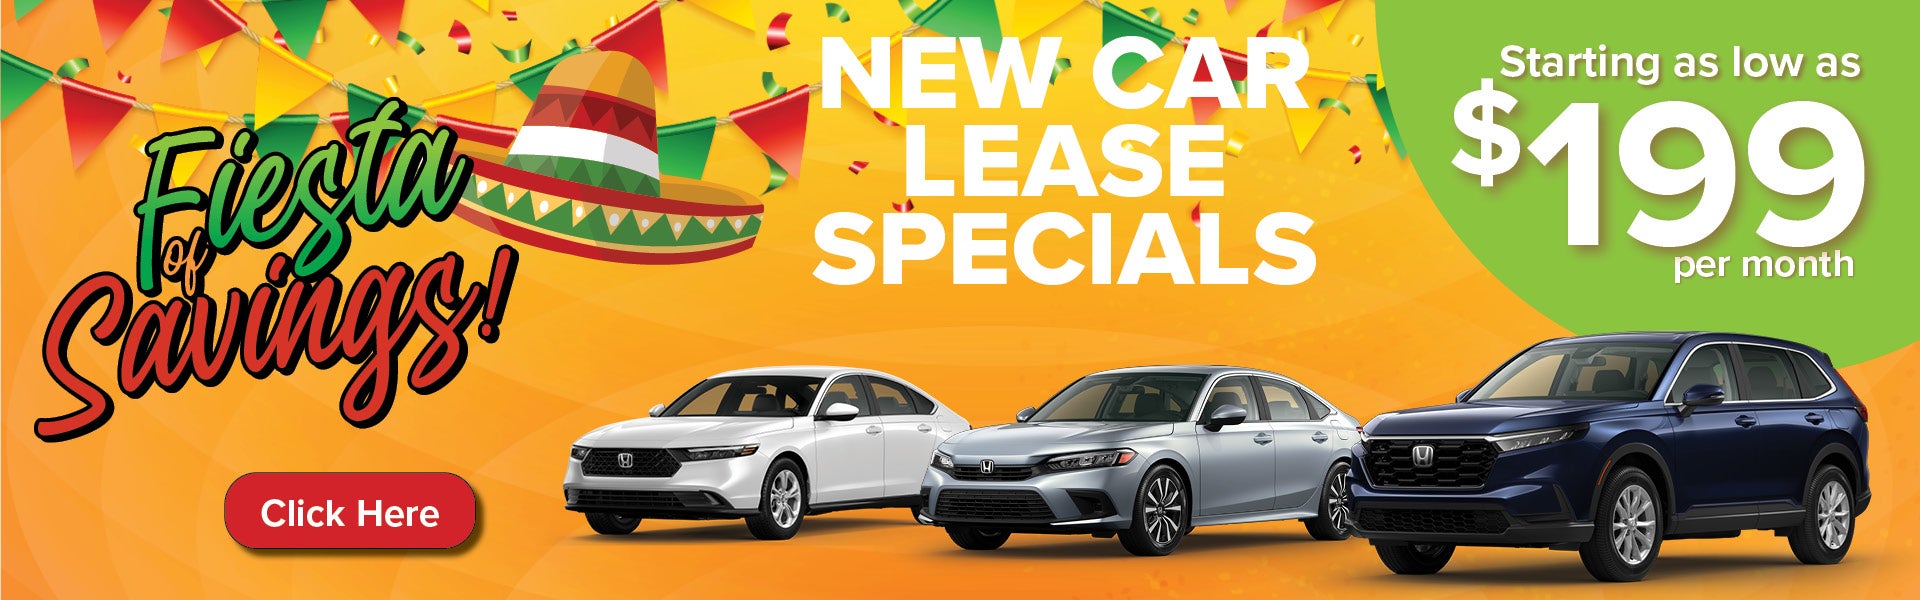 New Car Lease Specials Starting as low as $199 per month